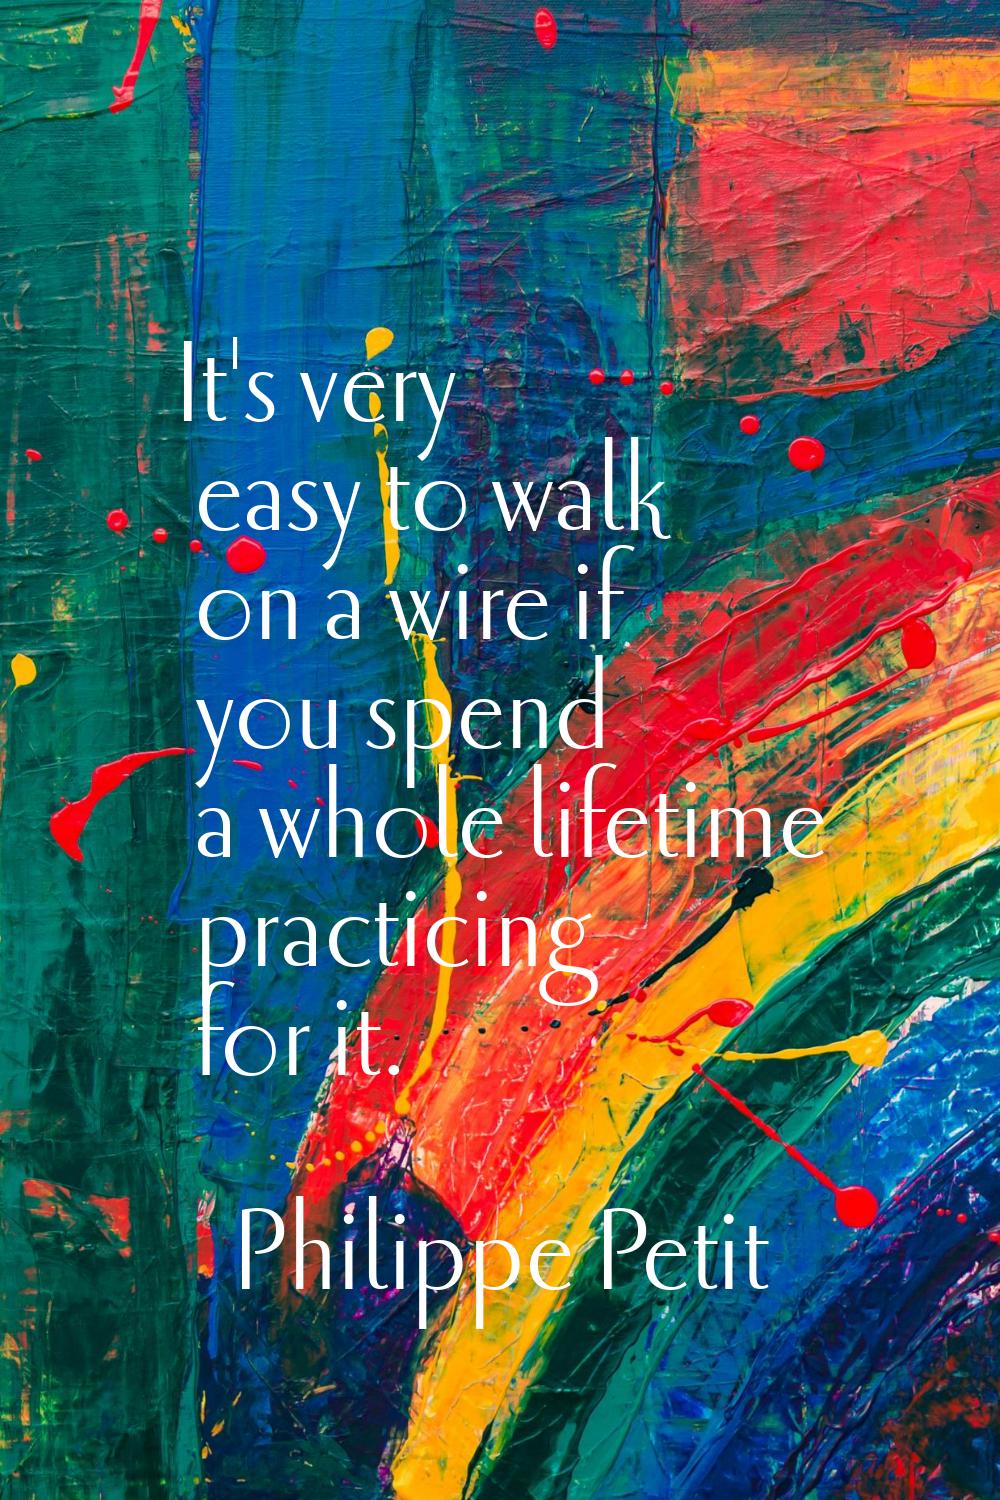 It's very easy to walk on a wire if you spend a whole lifetime practicing for it.